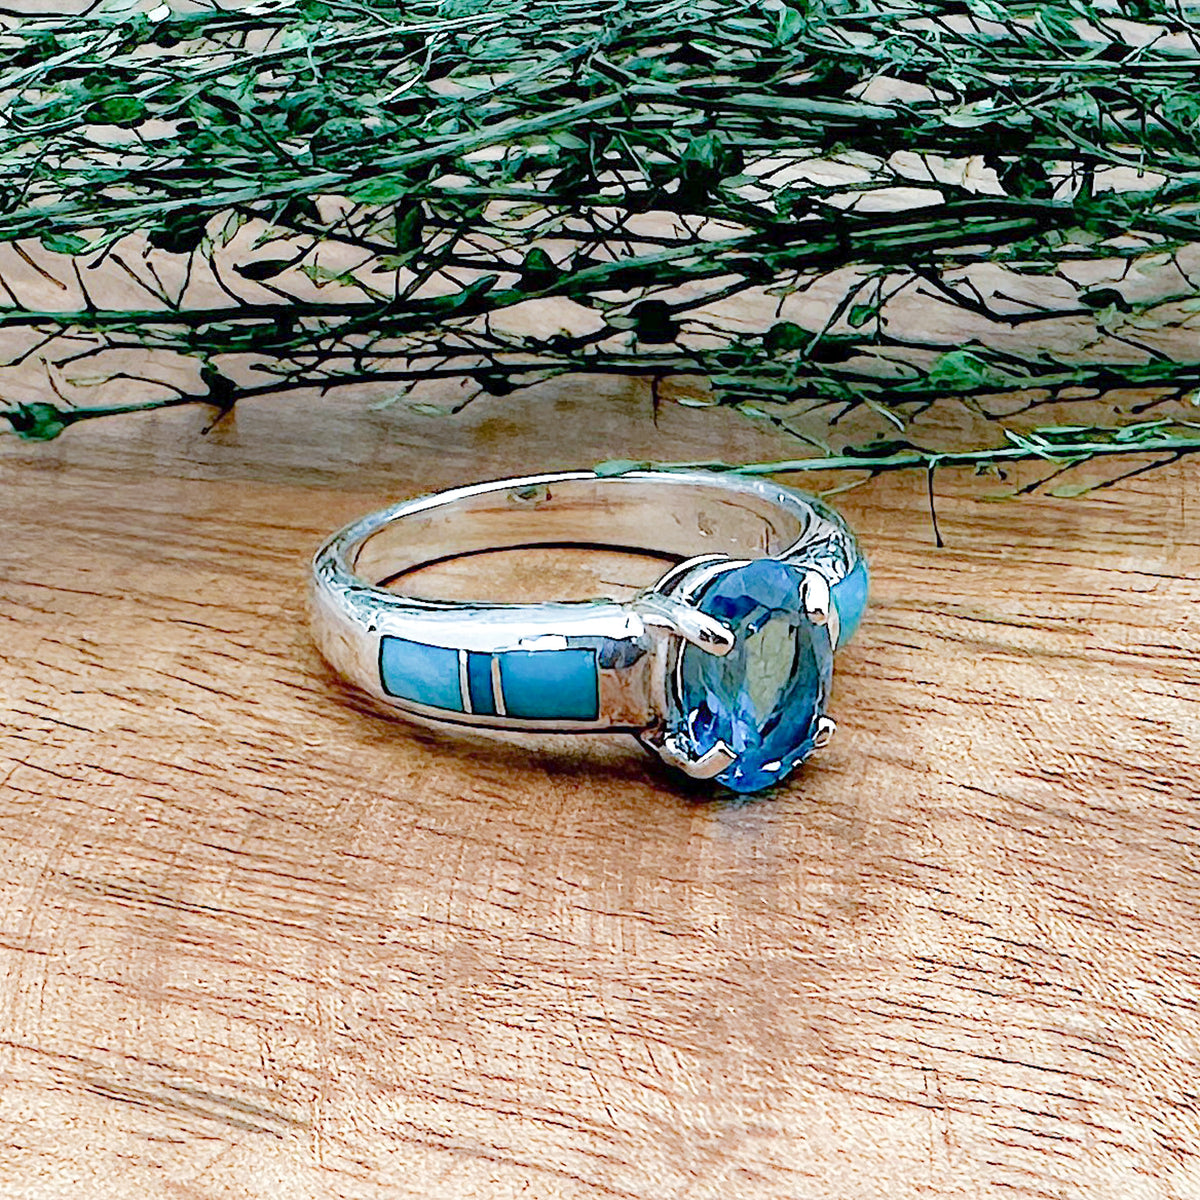 A handmade sterling silver ring that has 6 hand cut stones with Sleeping Beauty Turquoise and a London Blue Topaz on top that is a part of the David Rosales collection.